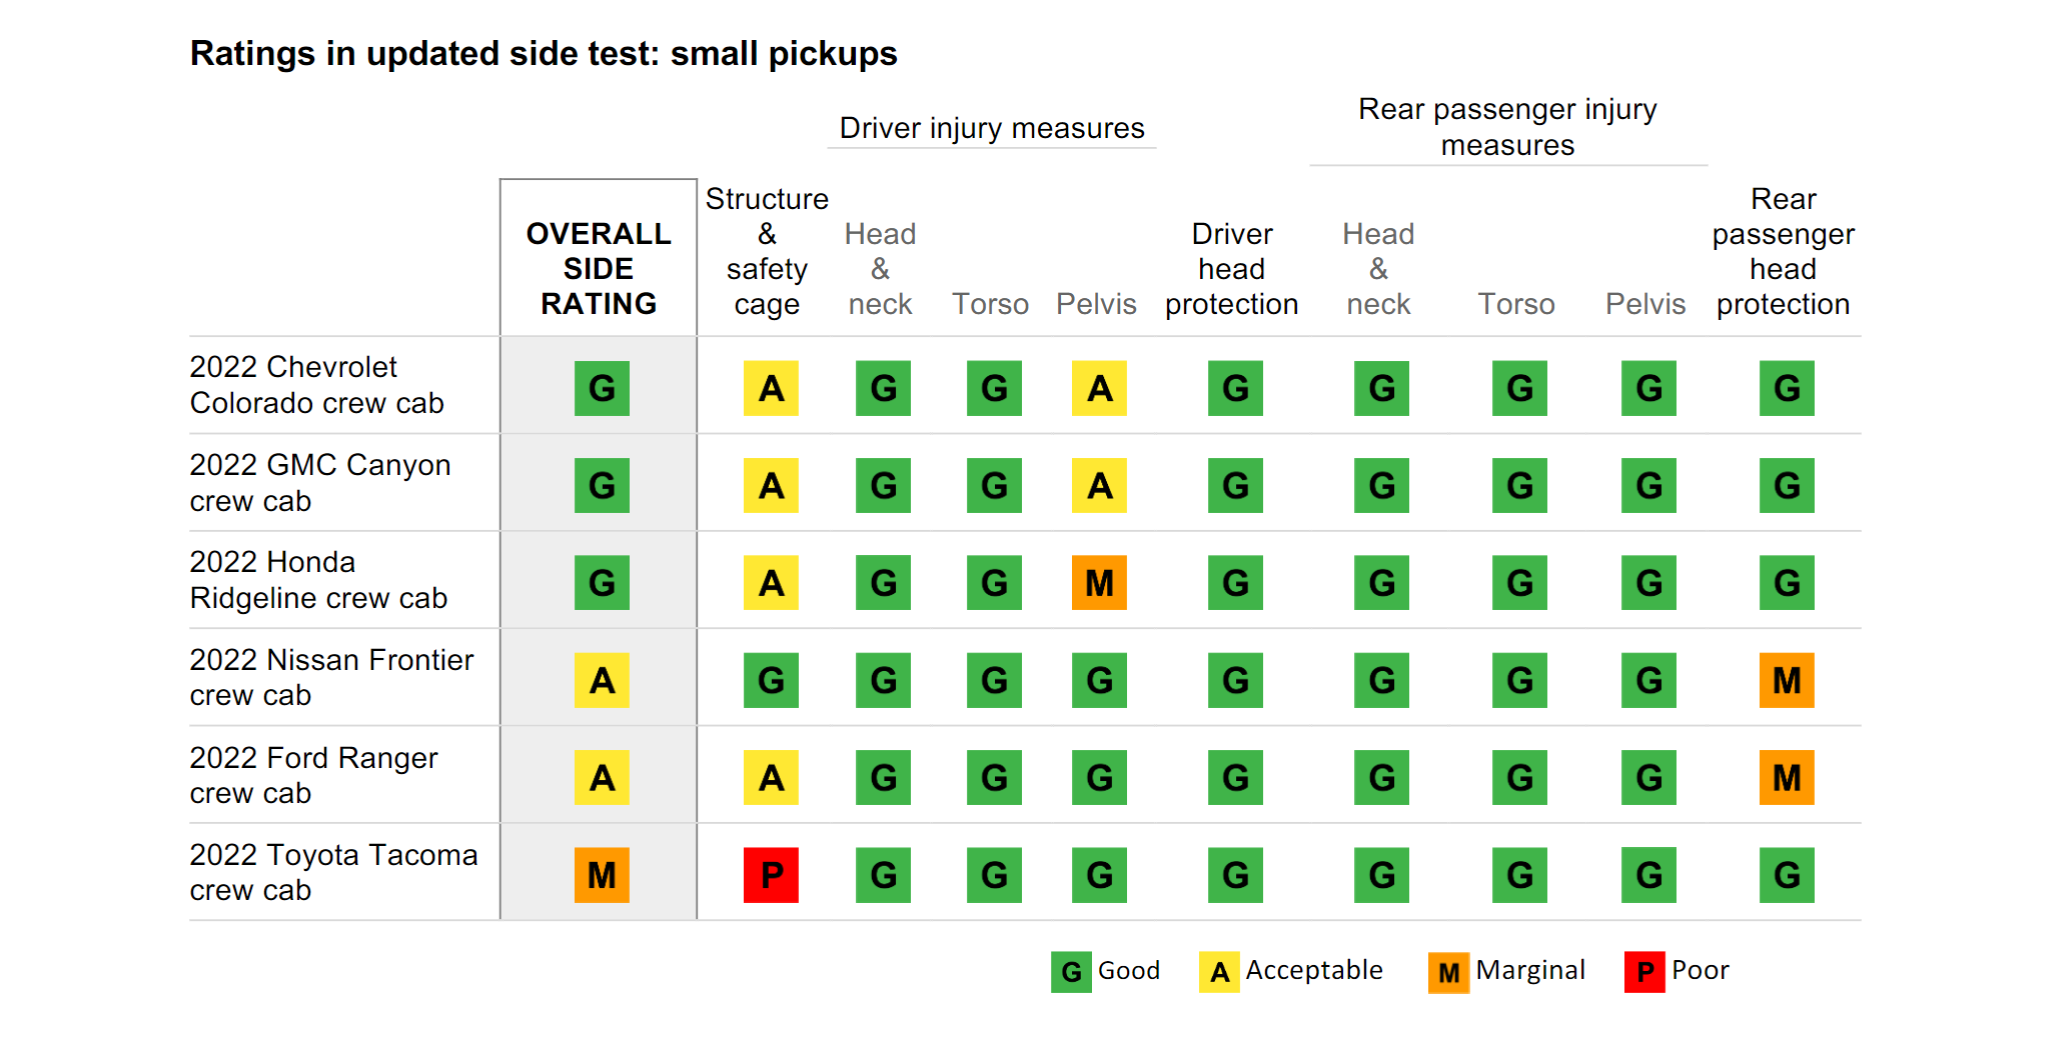 IIHS updated crash test ratings for six small pickup truck models